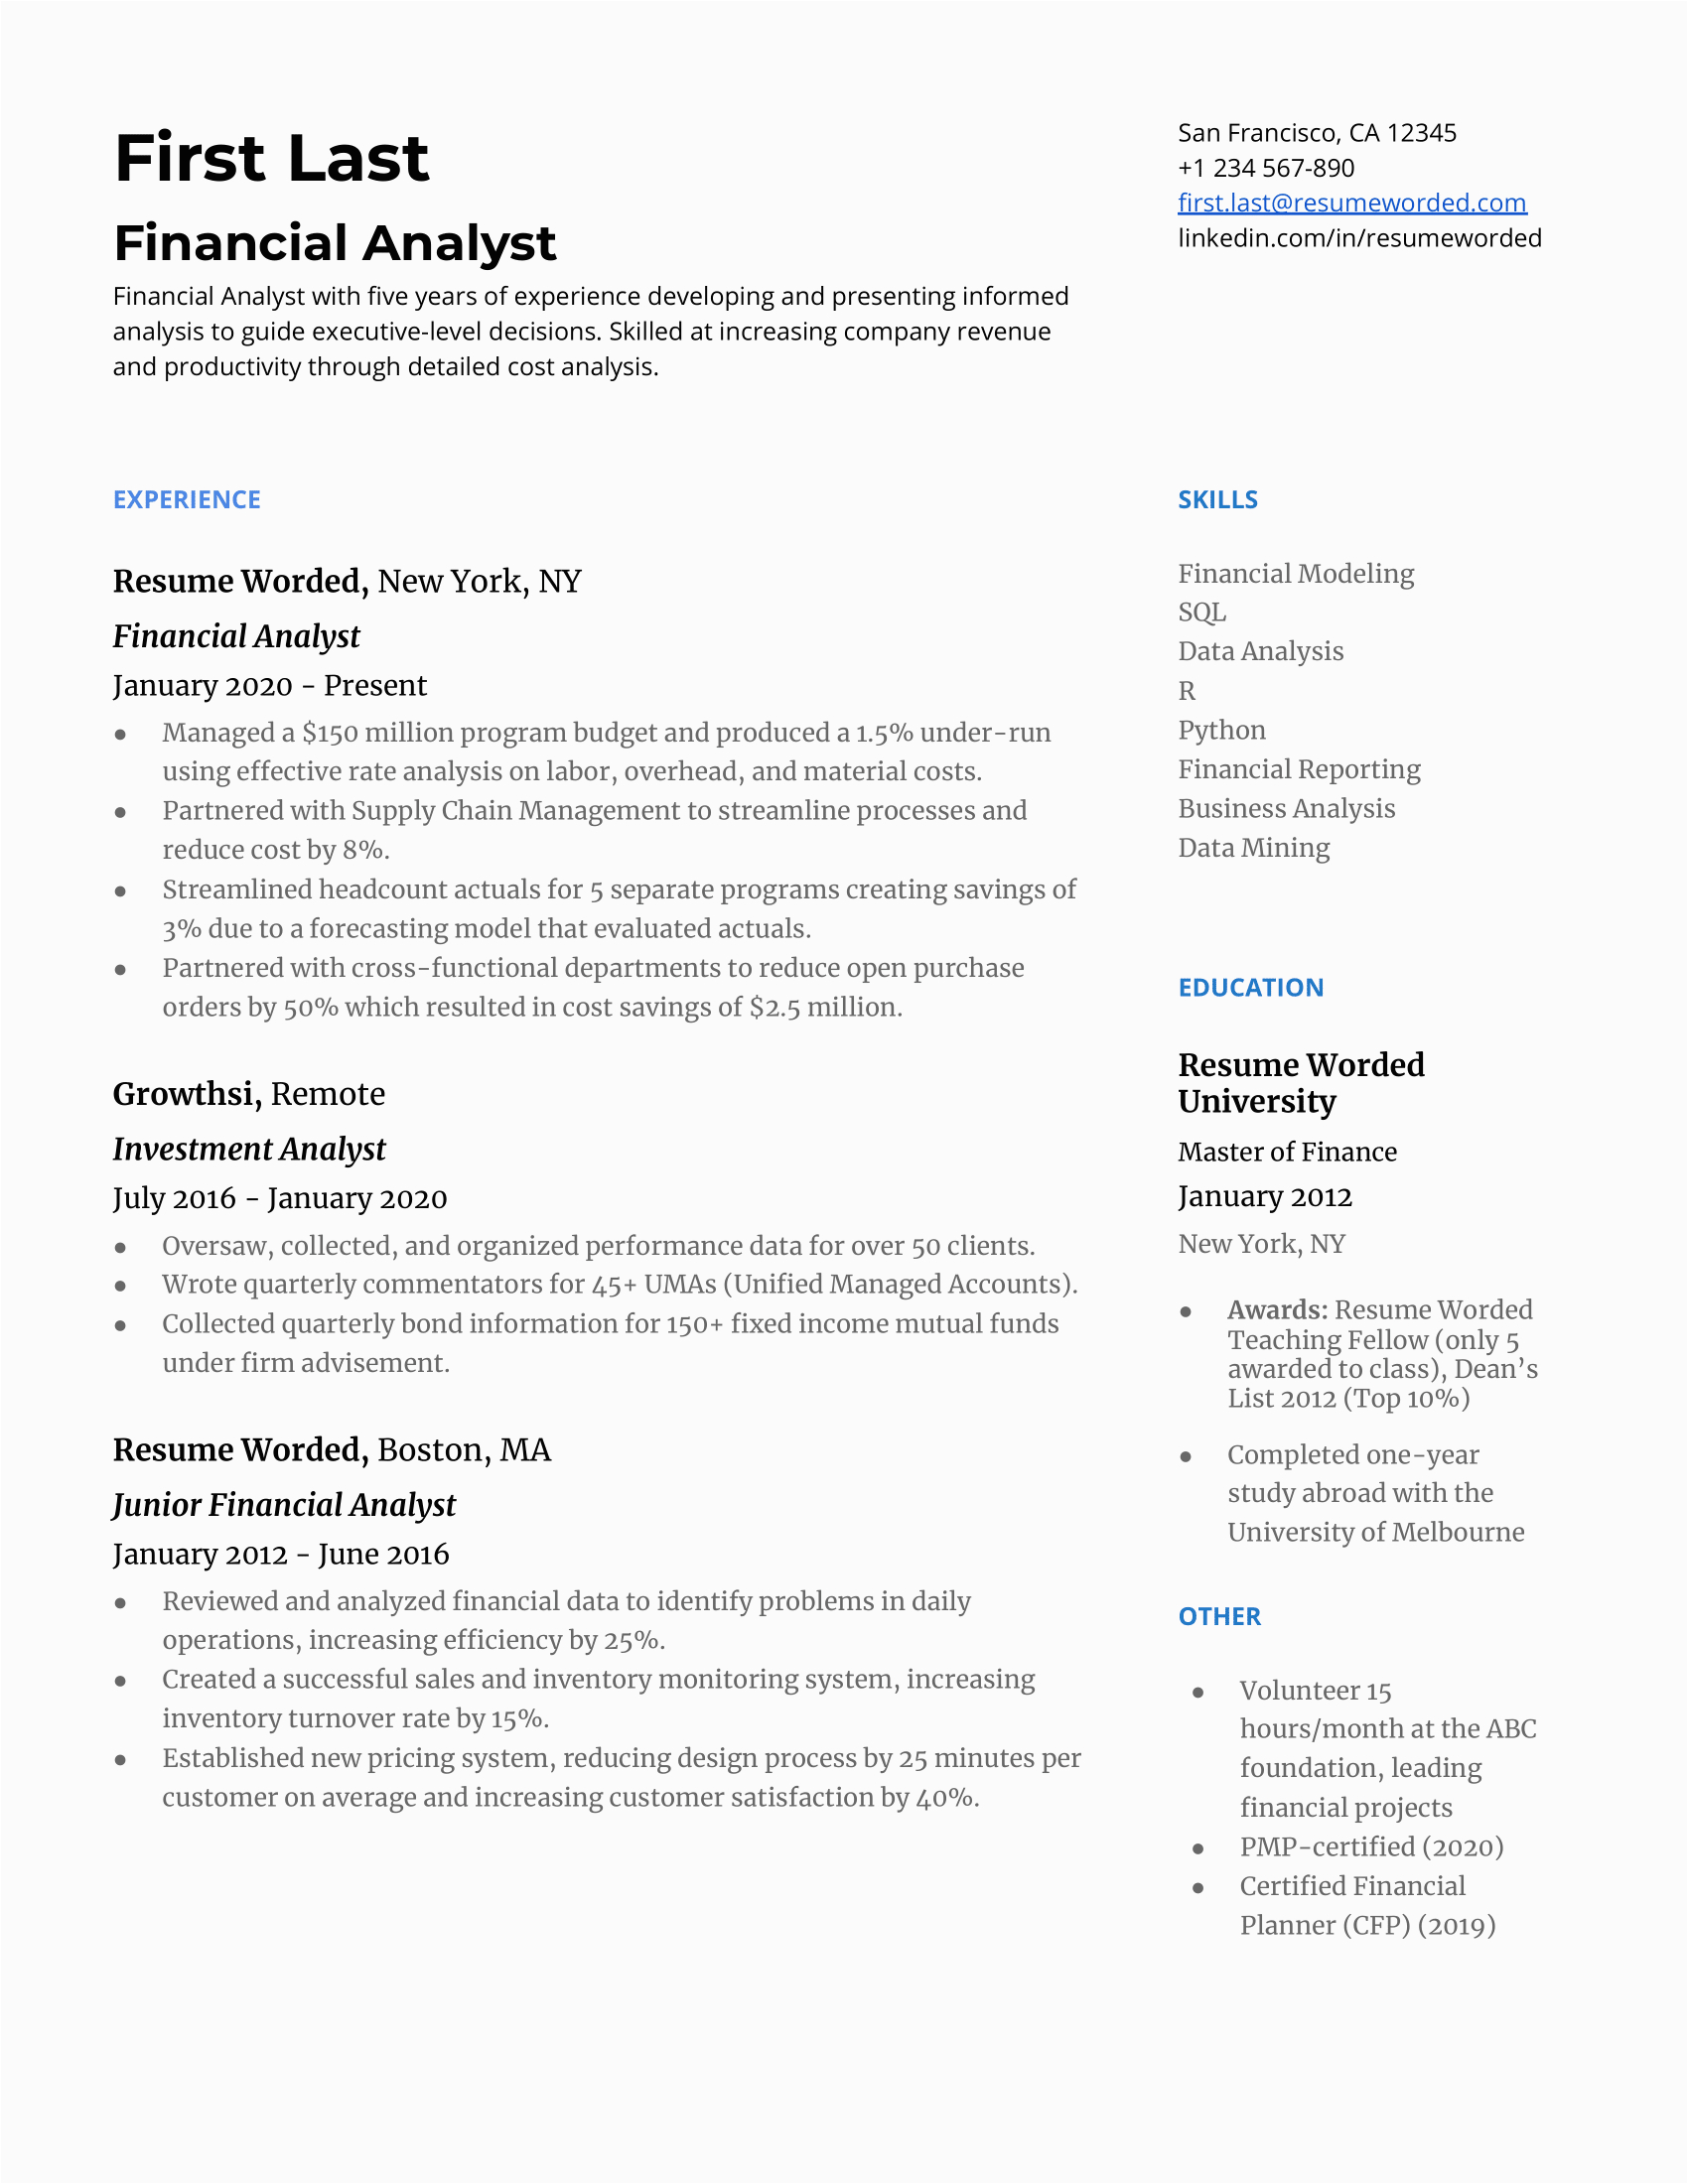 Sample Of Resume for Financial Analyst 7 Financial Analyst Resume Examples for 2022